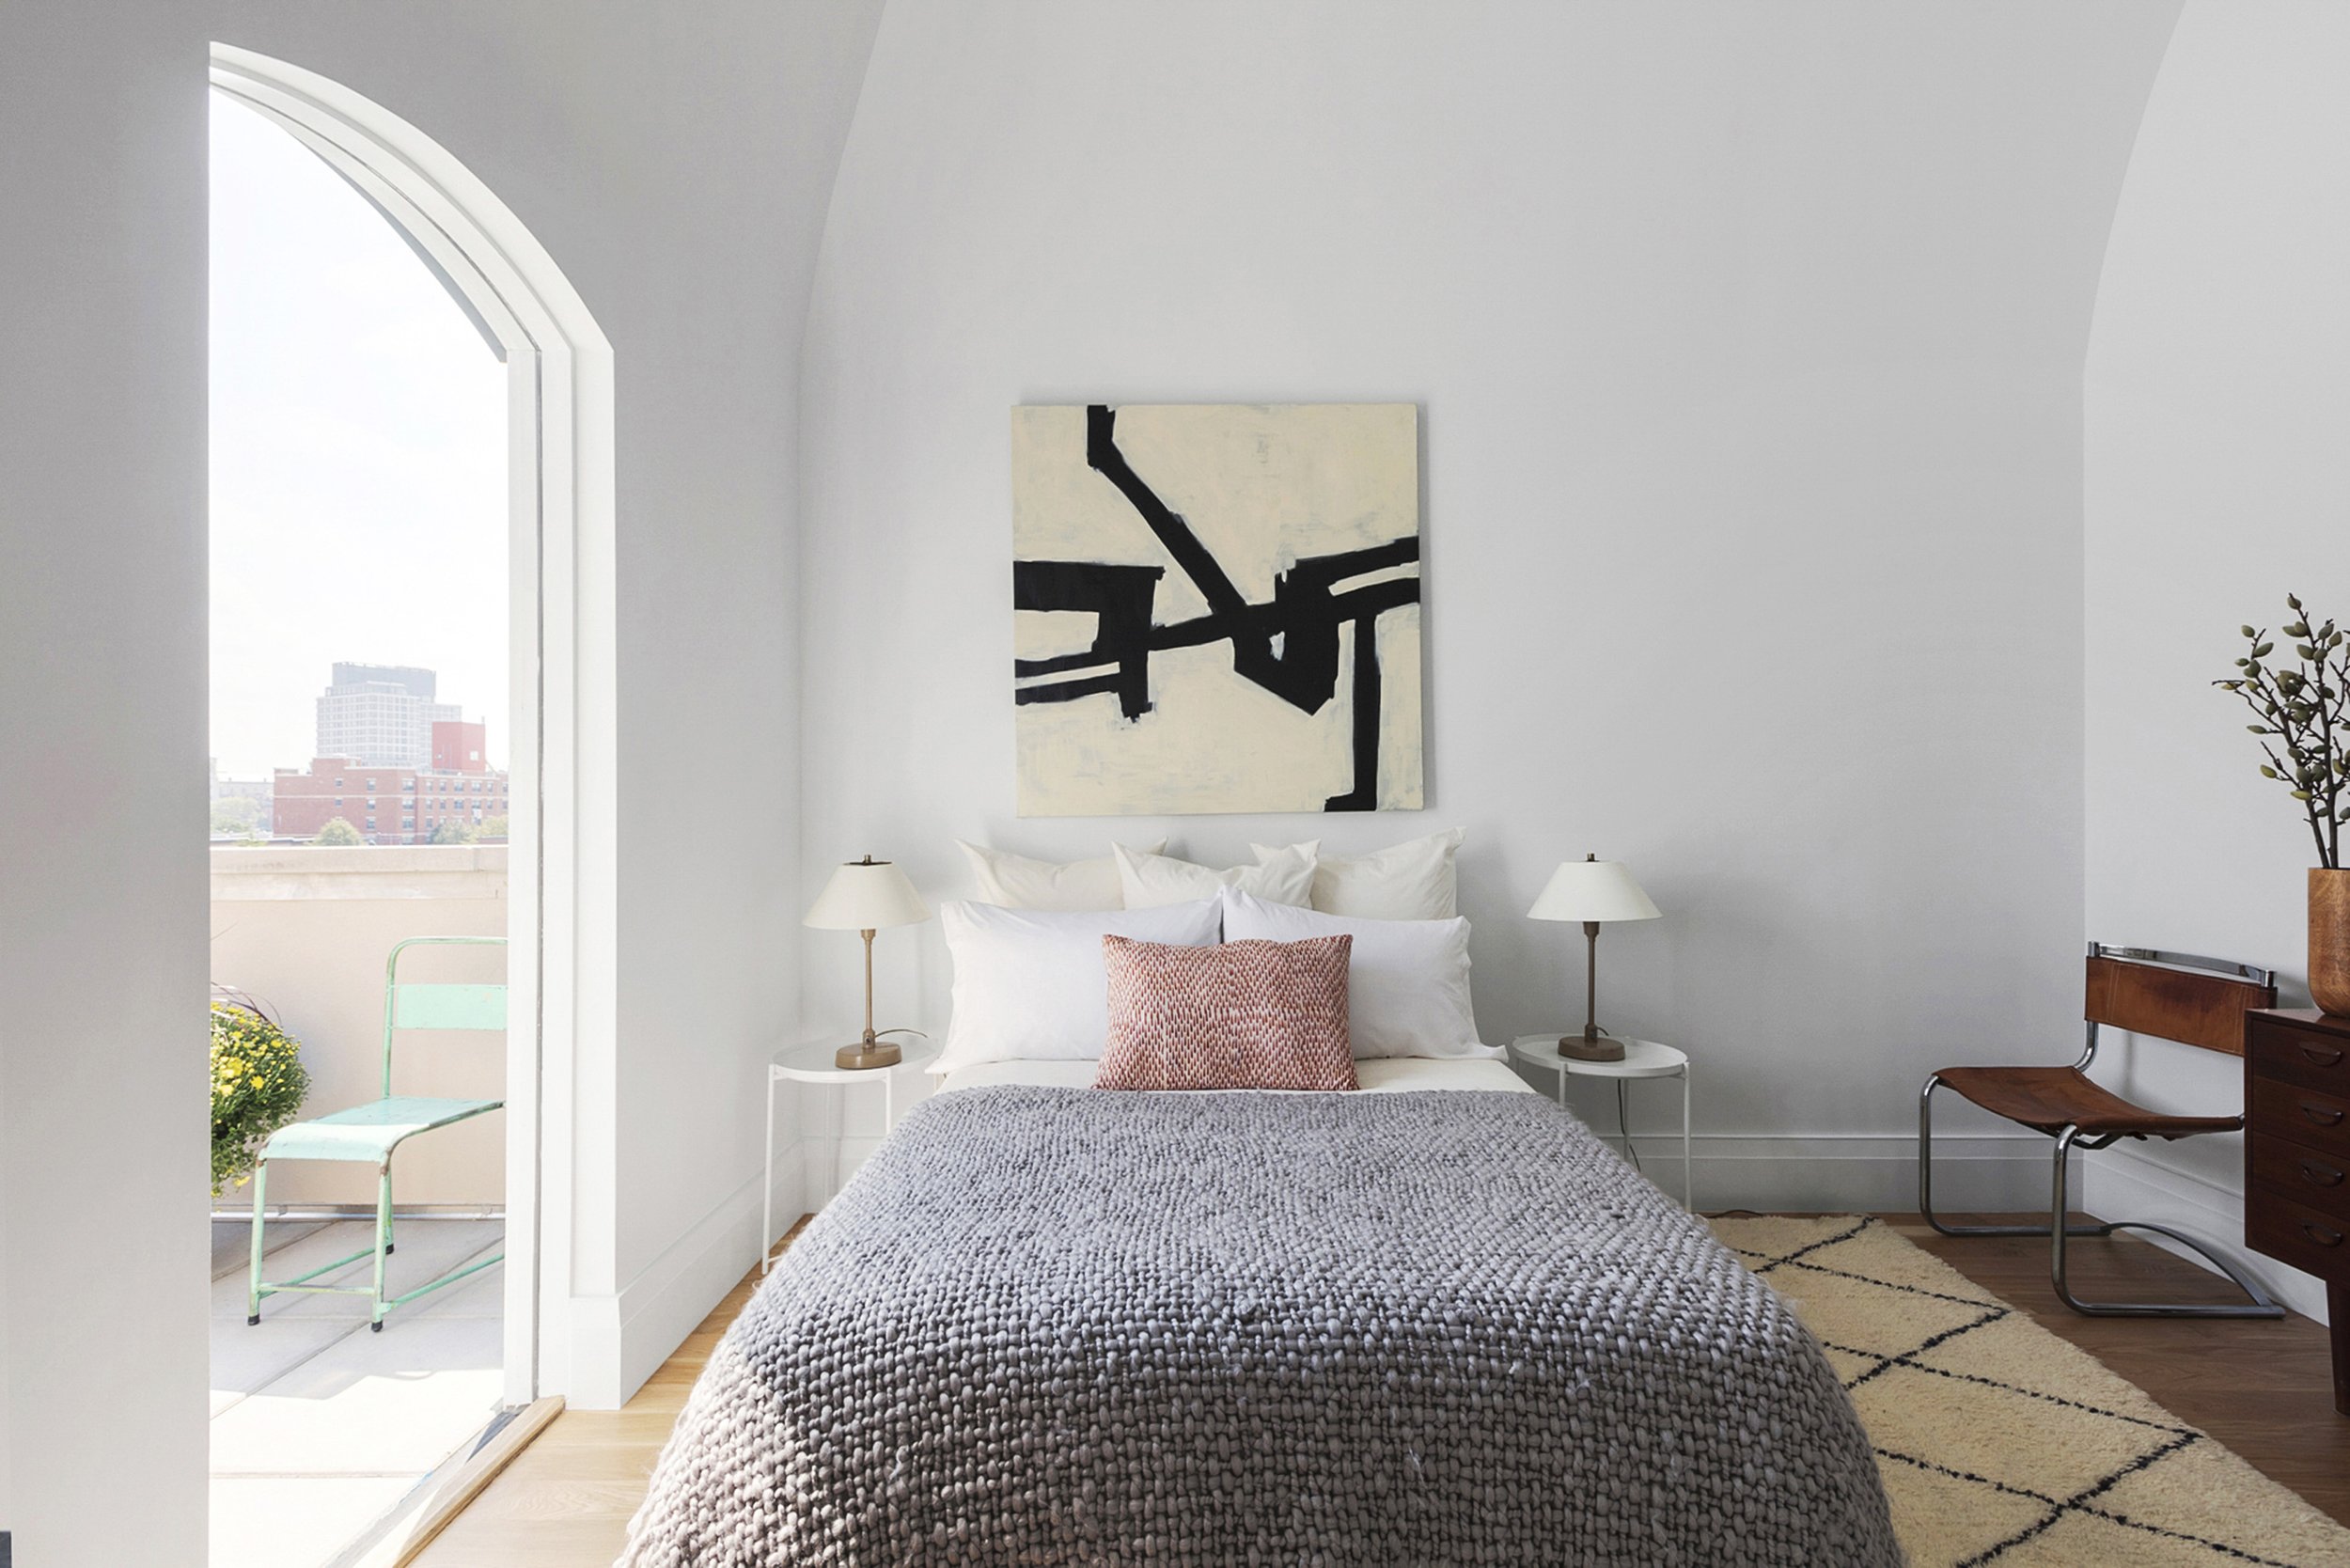  Hovey Design  South Oxford Street   This bedroom is just one of three designed by Hovey Design.&nbsp; This large ceiling three bedroom penthouse condo offers three private outdoor spaces with views down tree lined streets right by Brooklyn’s Barclay